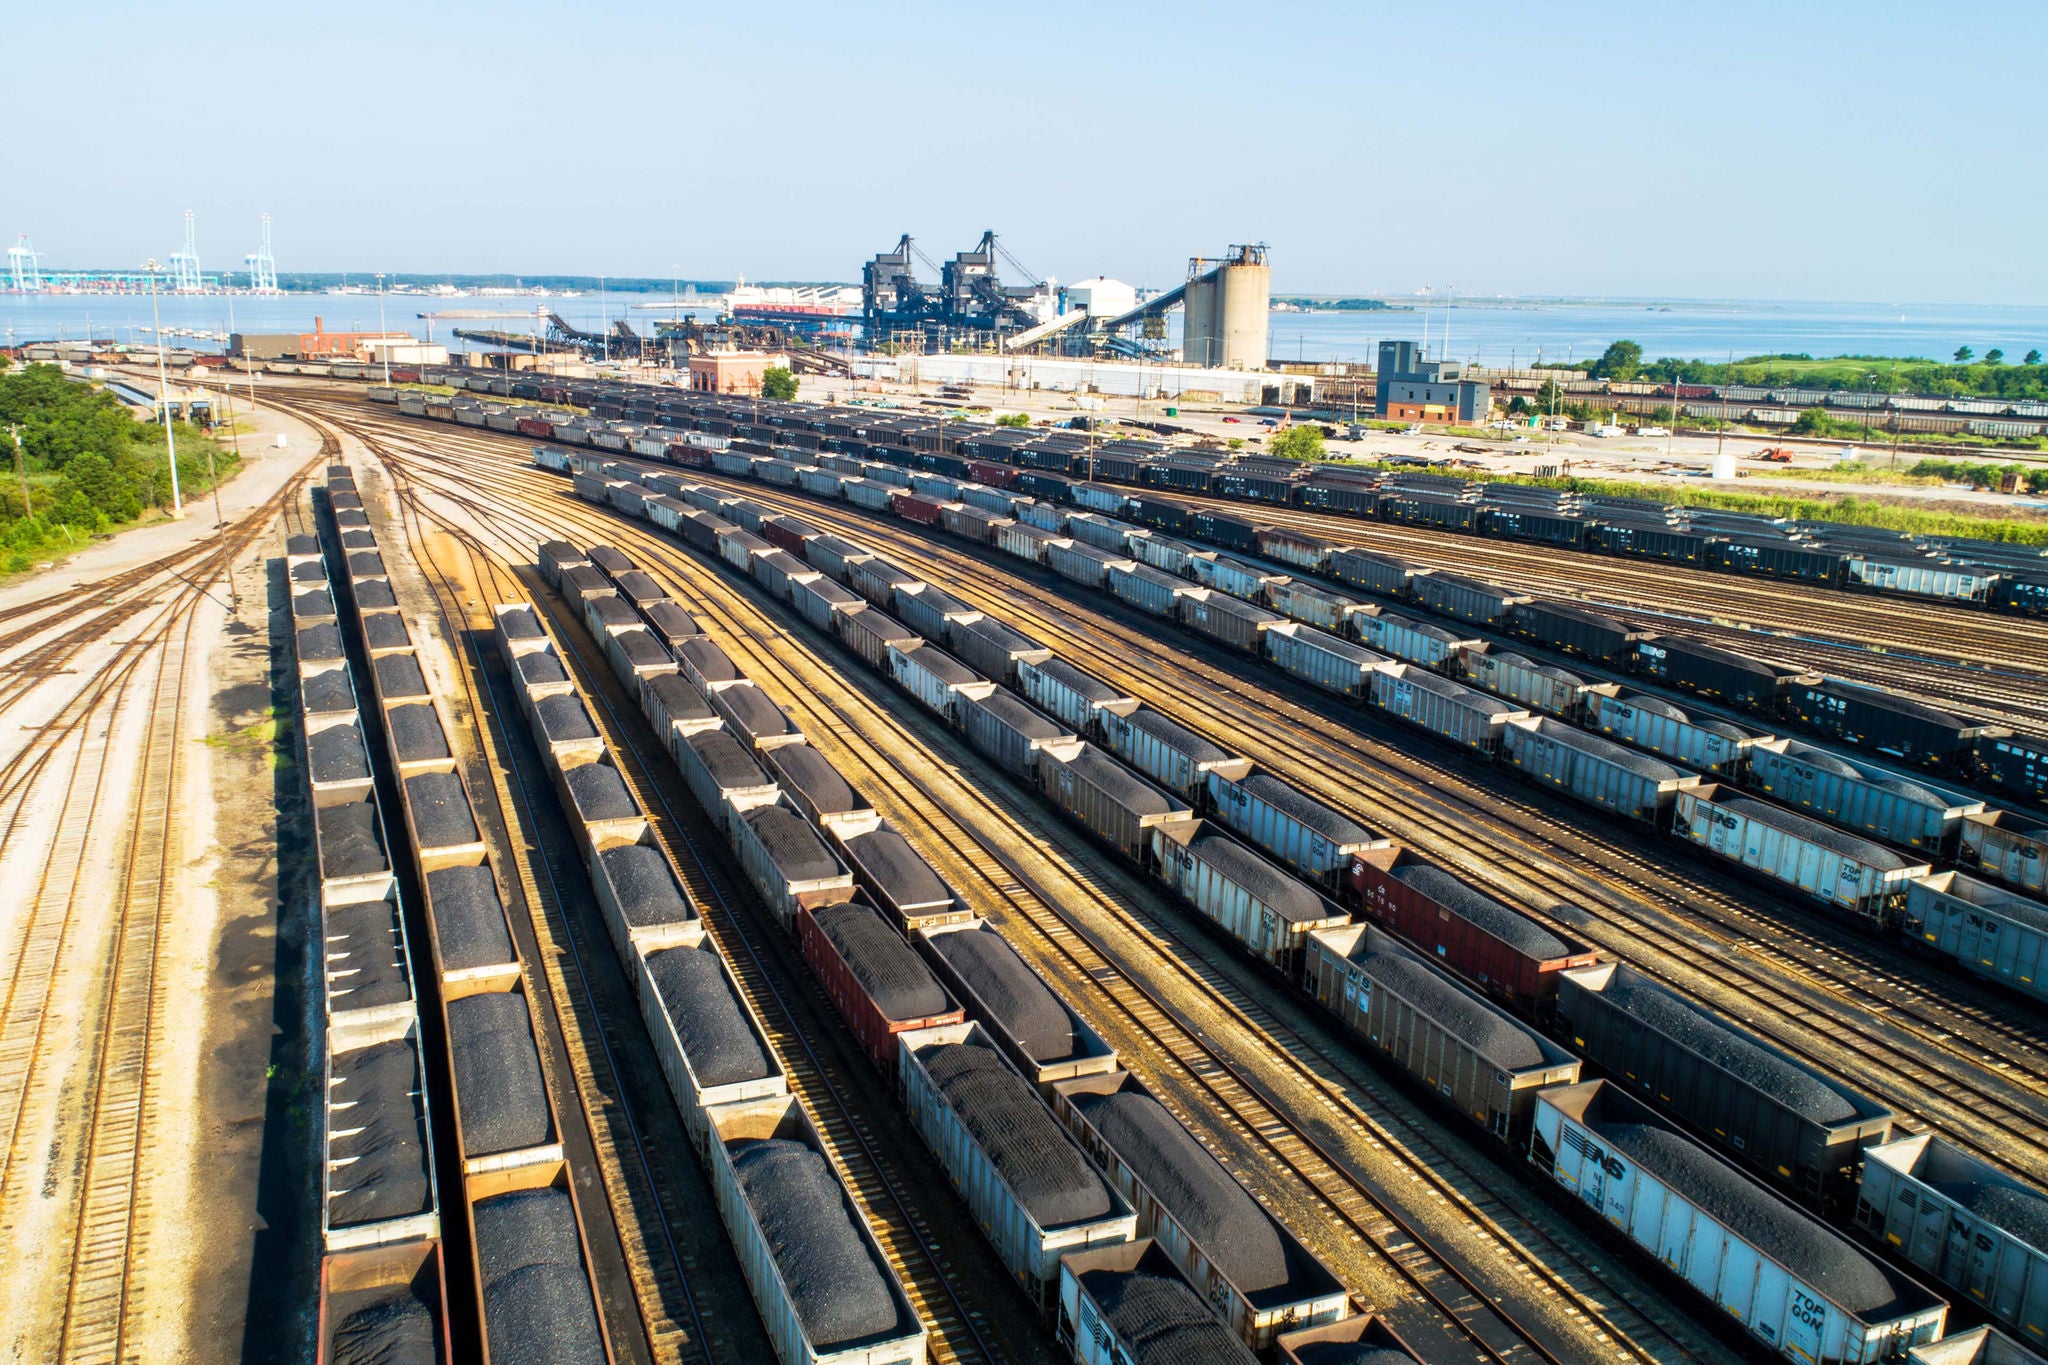 An aerial shot of intermodal transportation coal cars on Norfolk Southern railways at the ready for coal transportation and coal shipping.